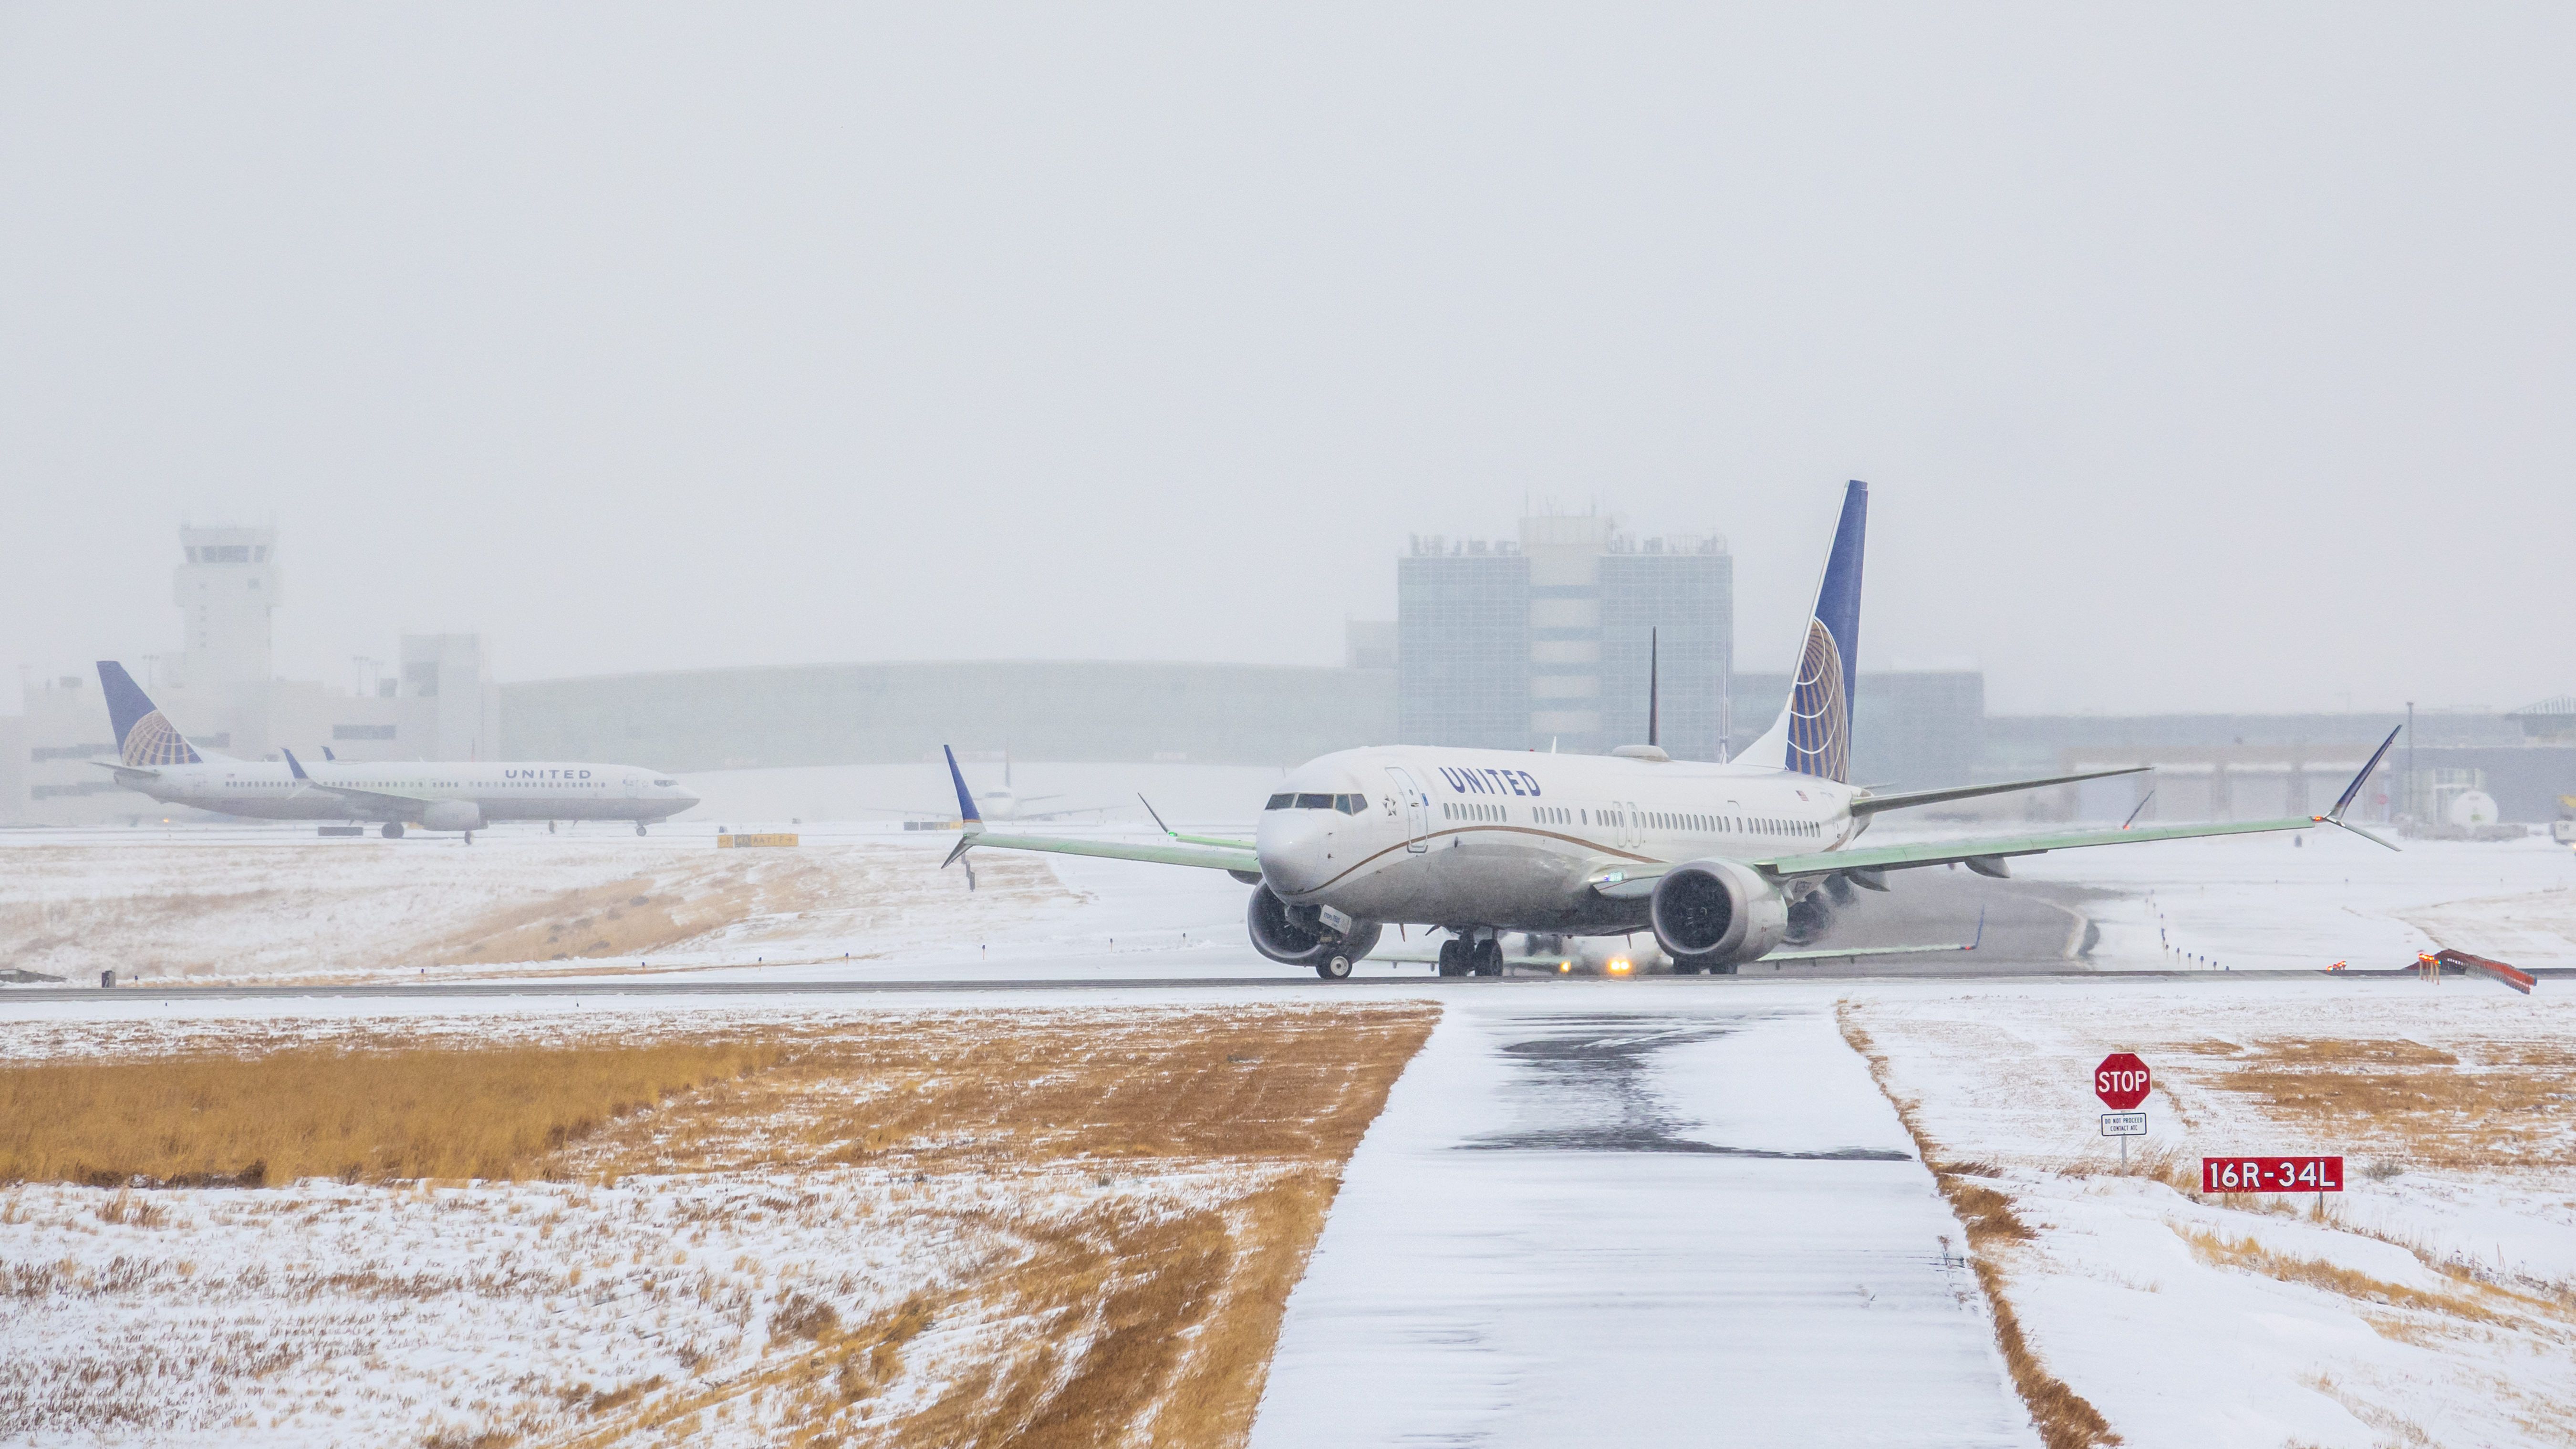 United Airlines Planes on Taxiway